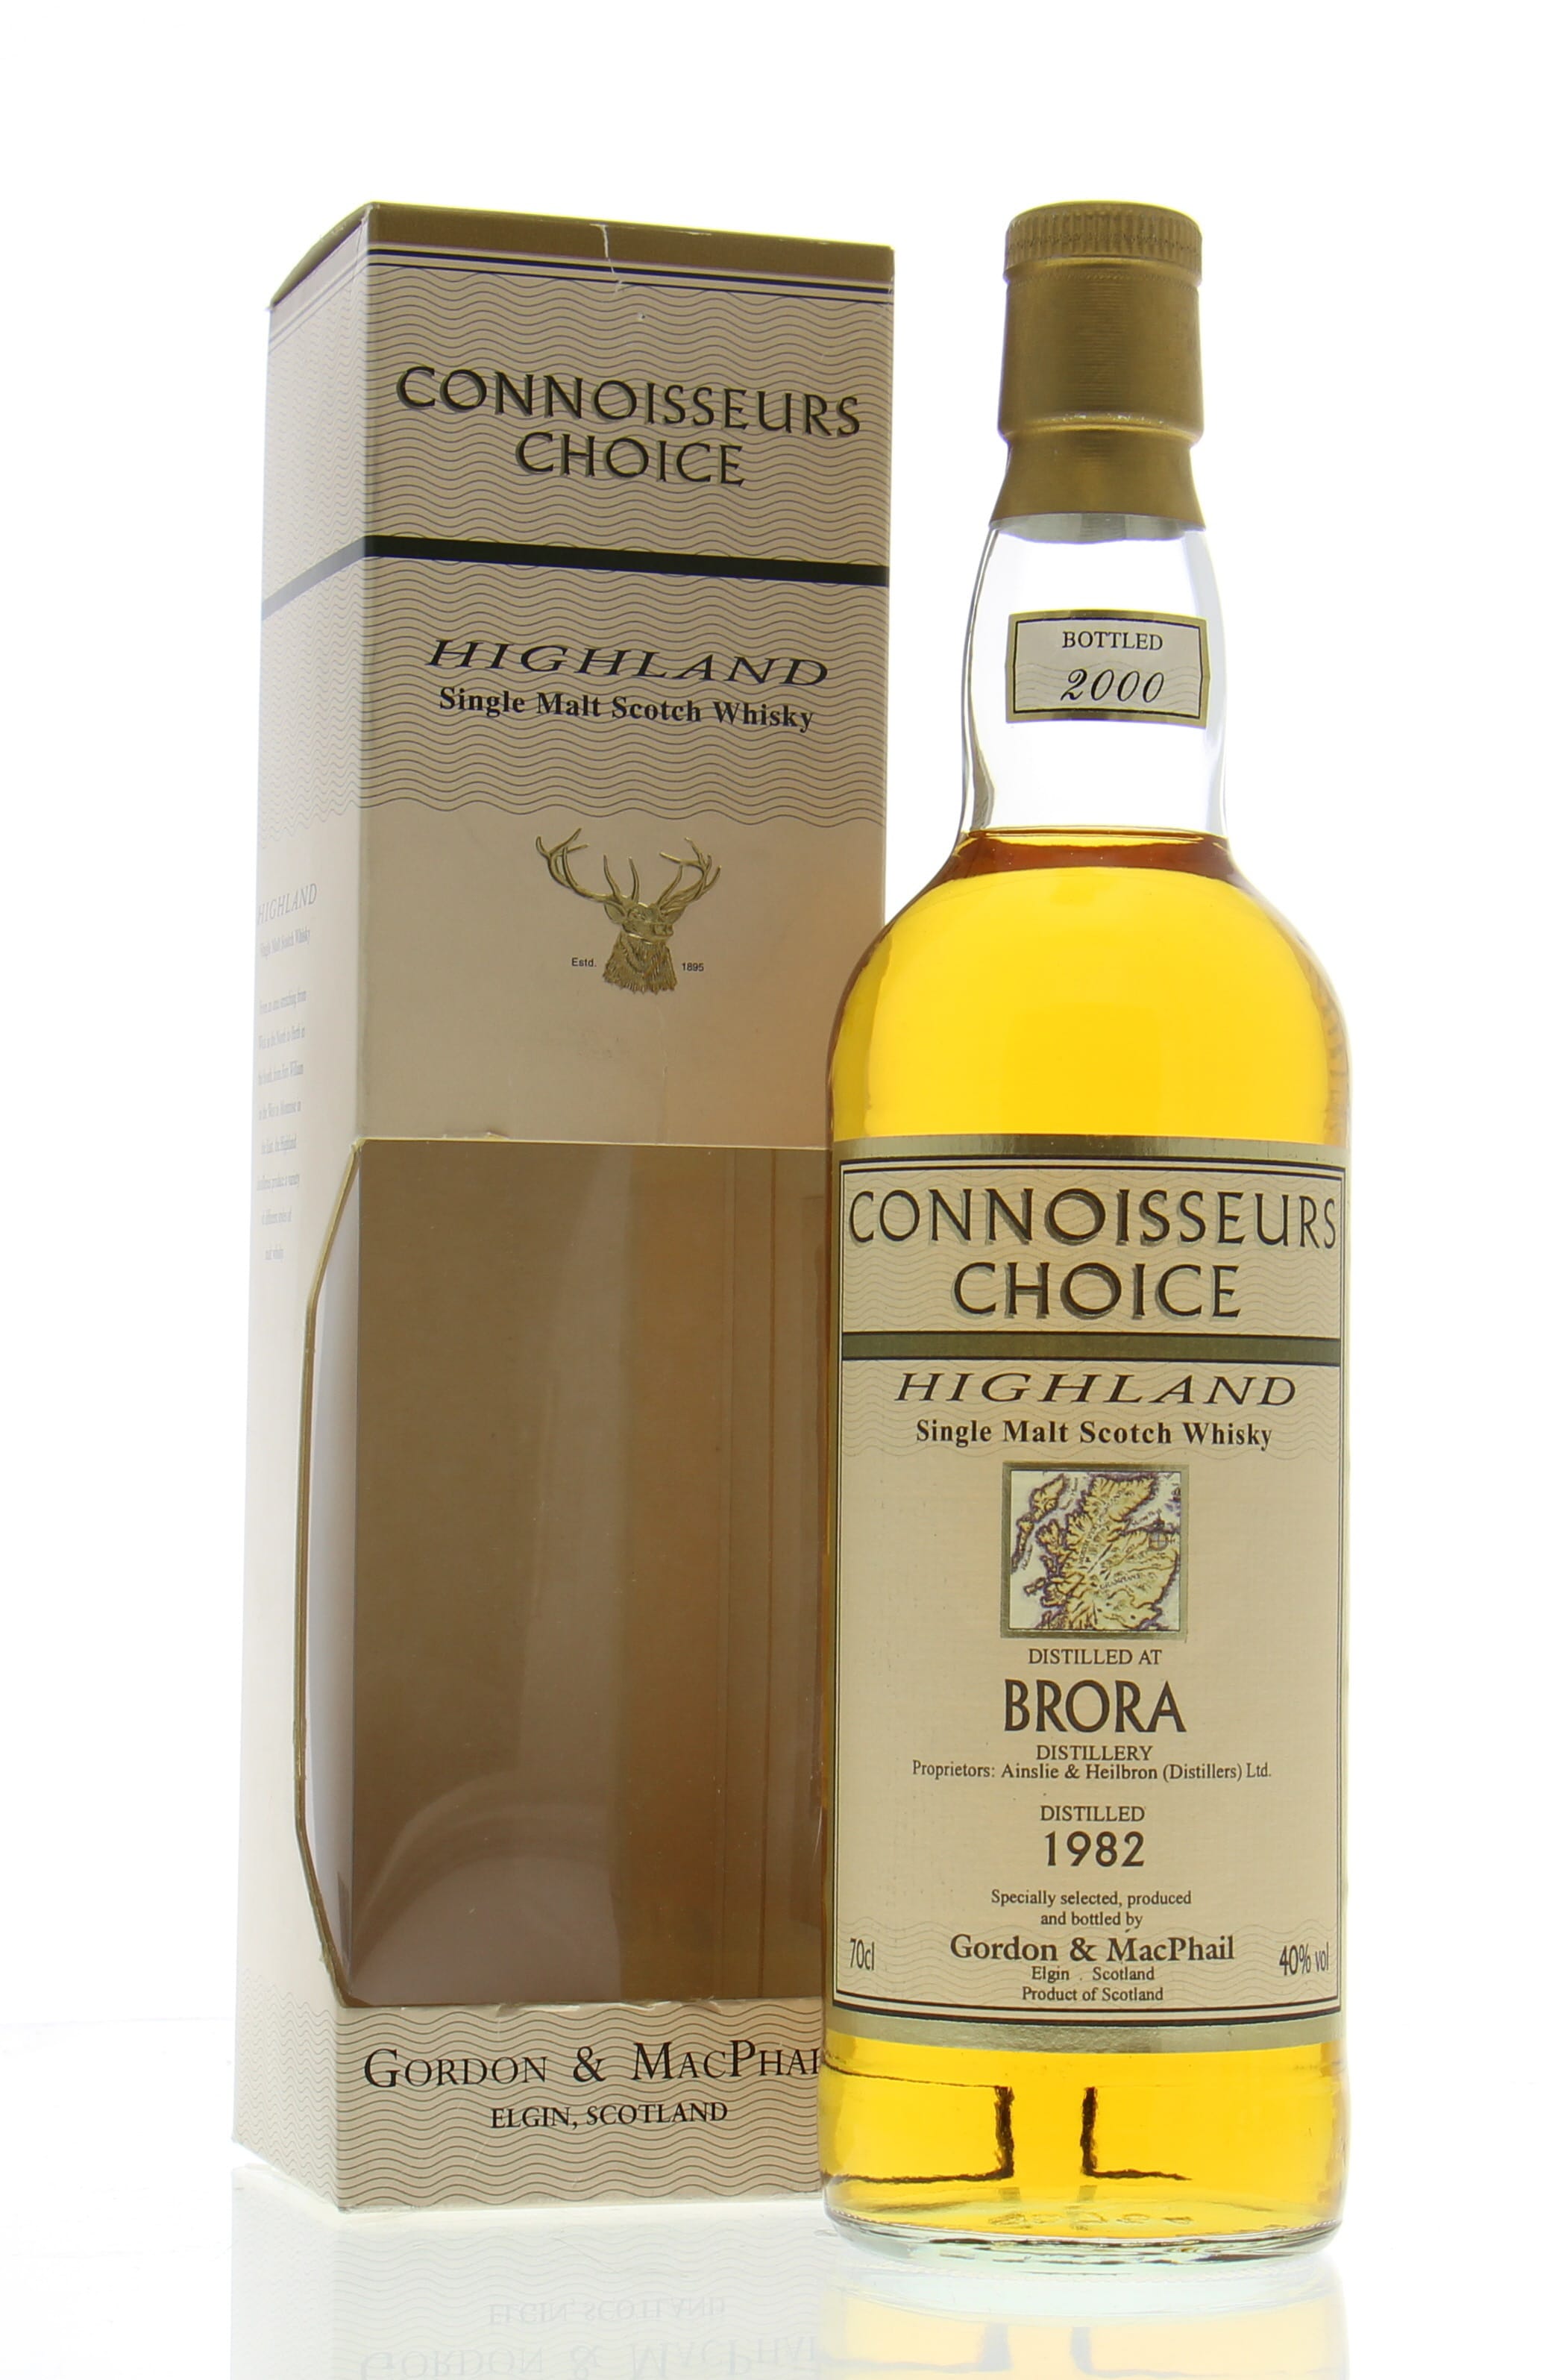 Brora - 1982 Gordon & MacPhail Connoisseurs Choice New map Label 40% 1982 In Original Container